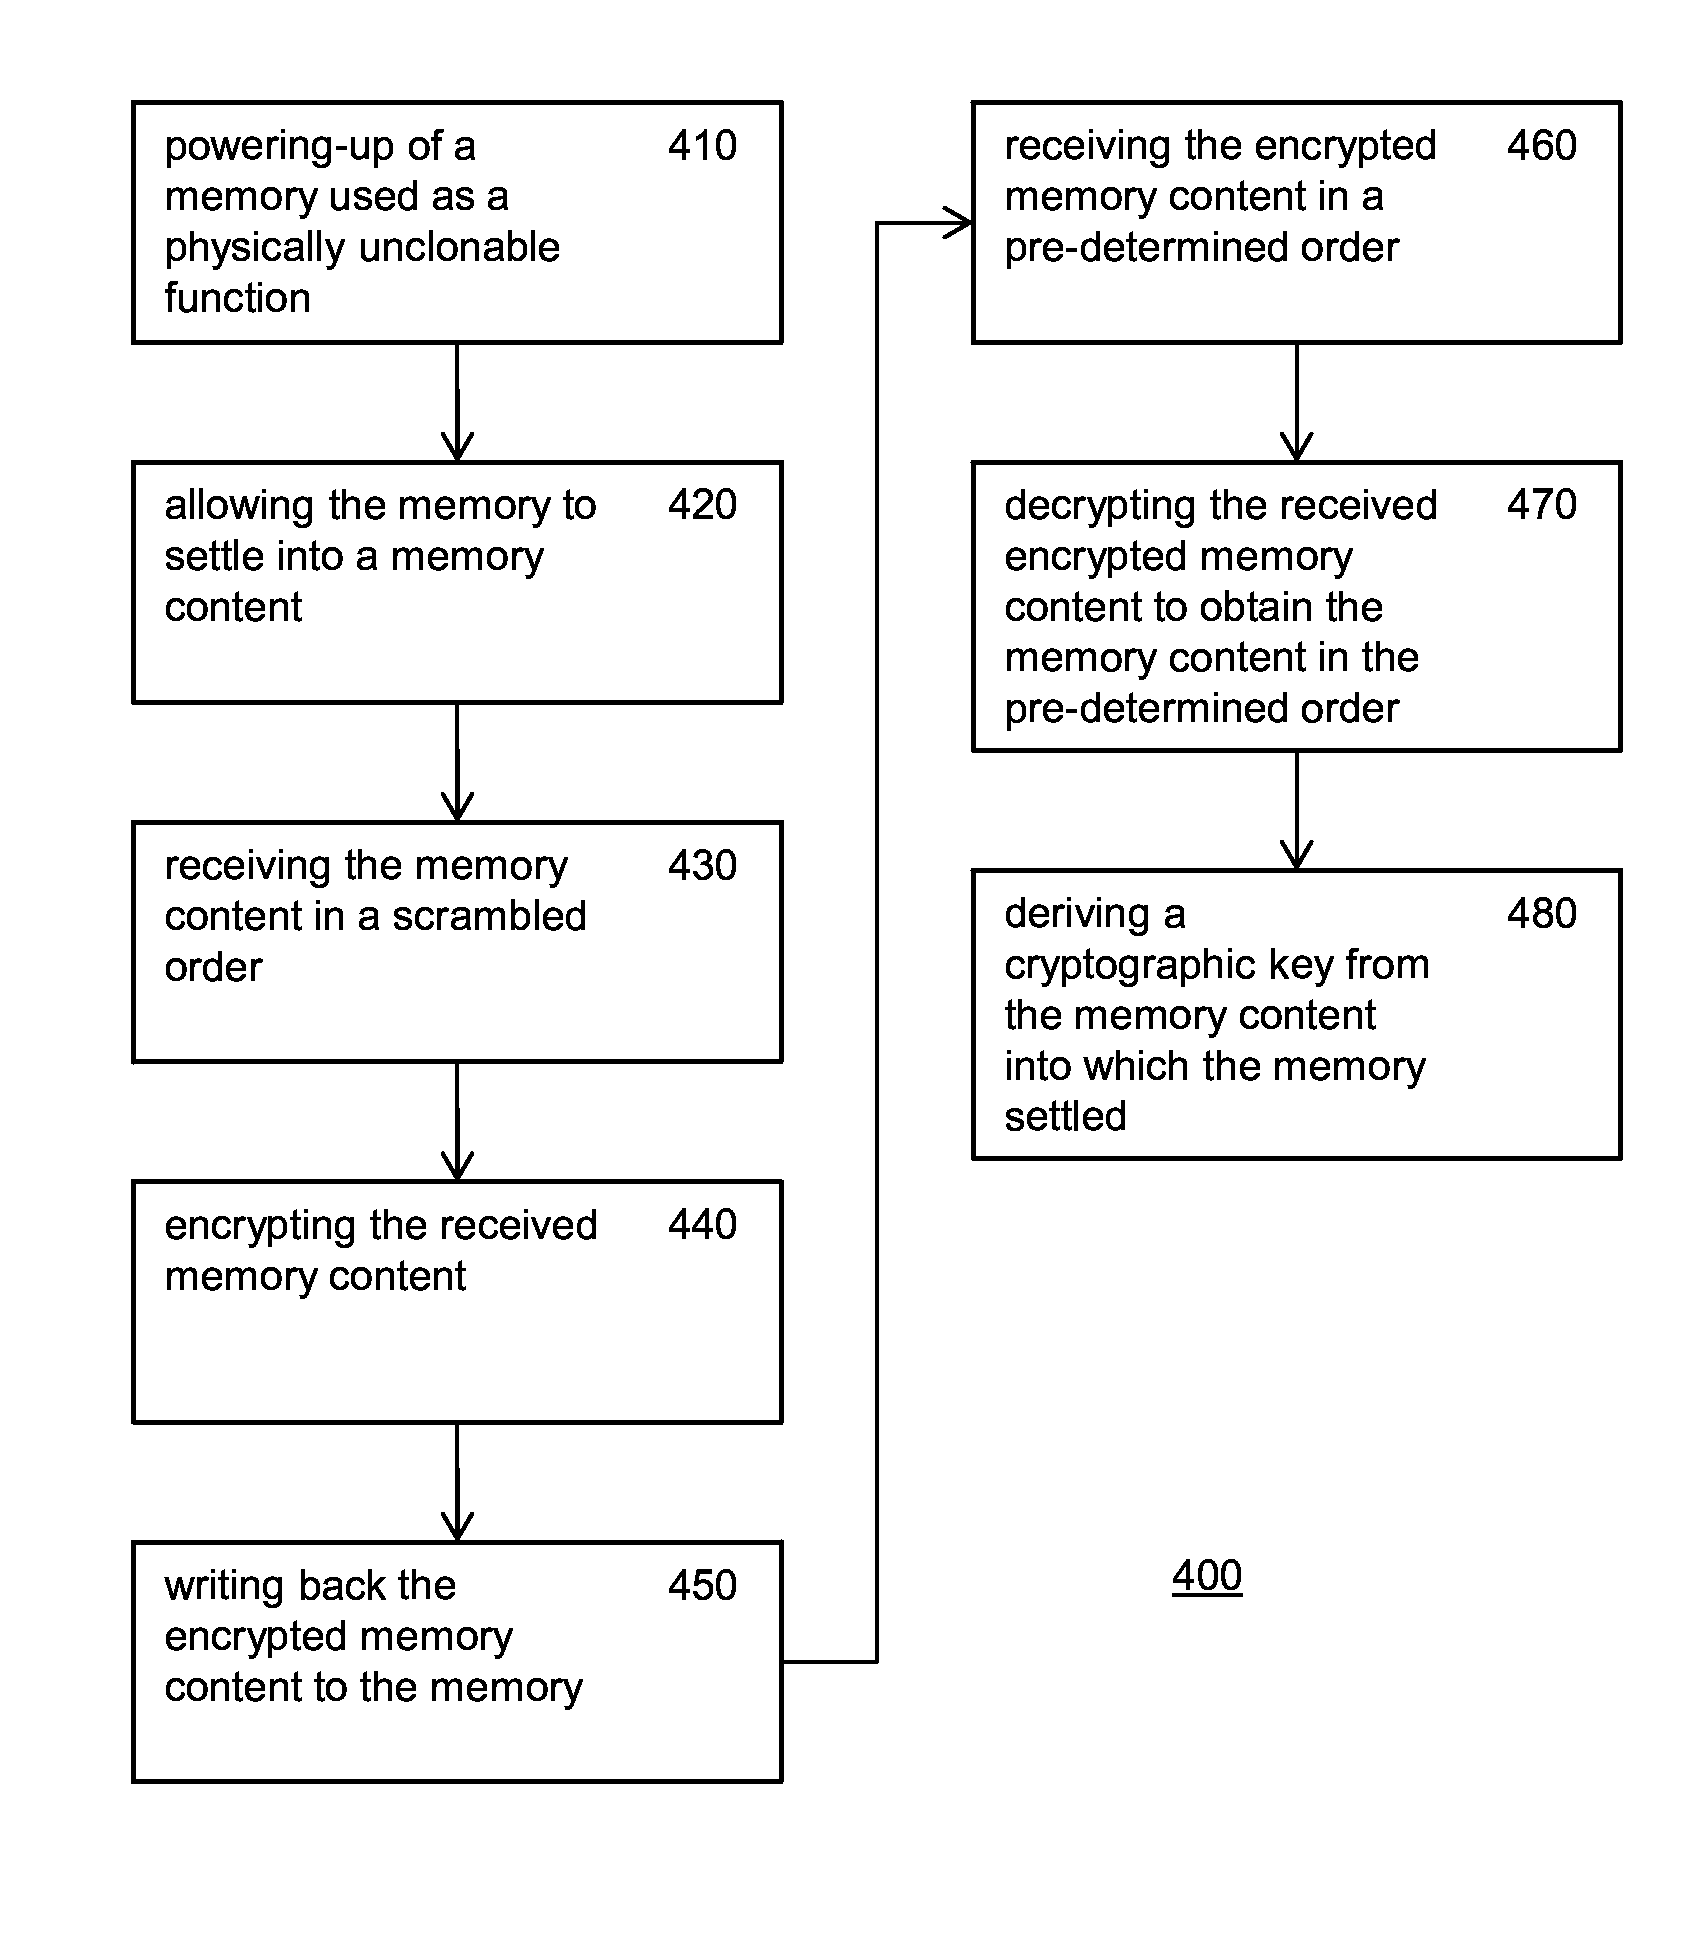 System for generating a cryptographic key from a memory used as a physically unclonable function